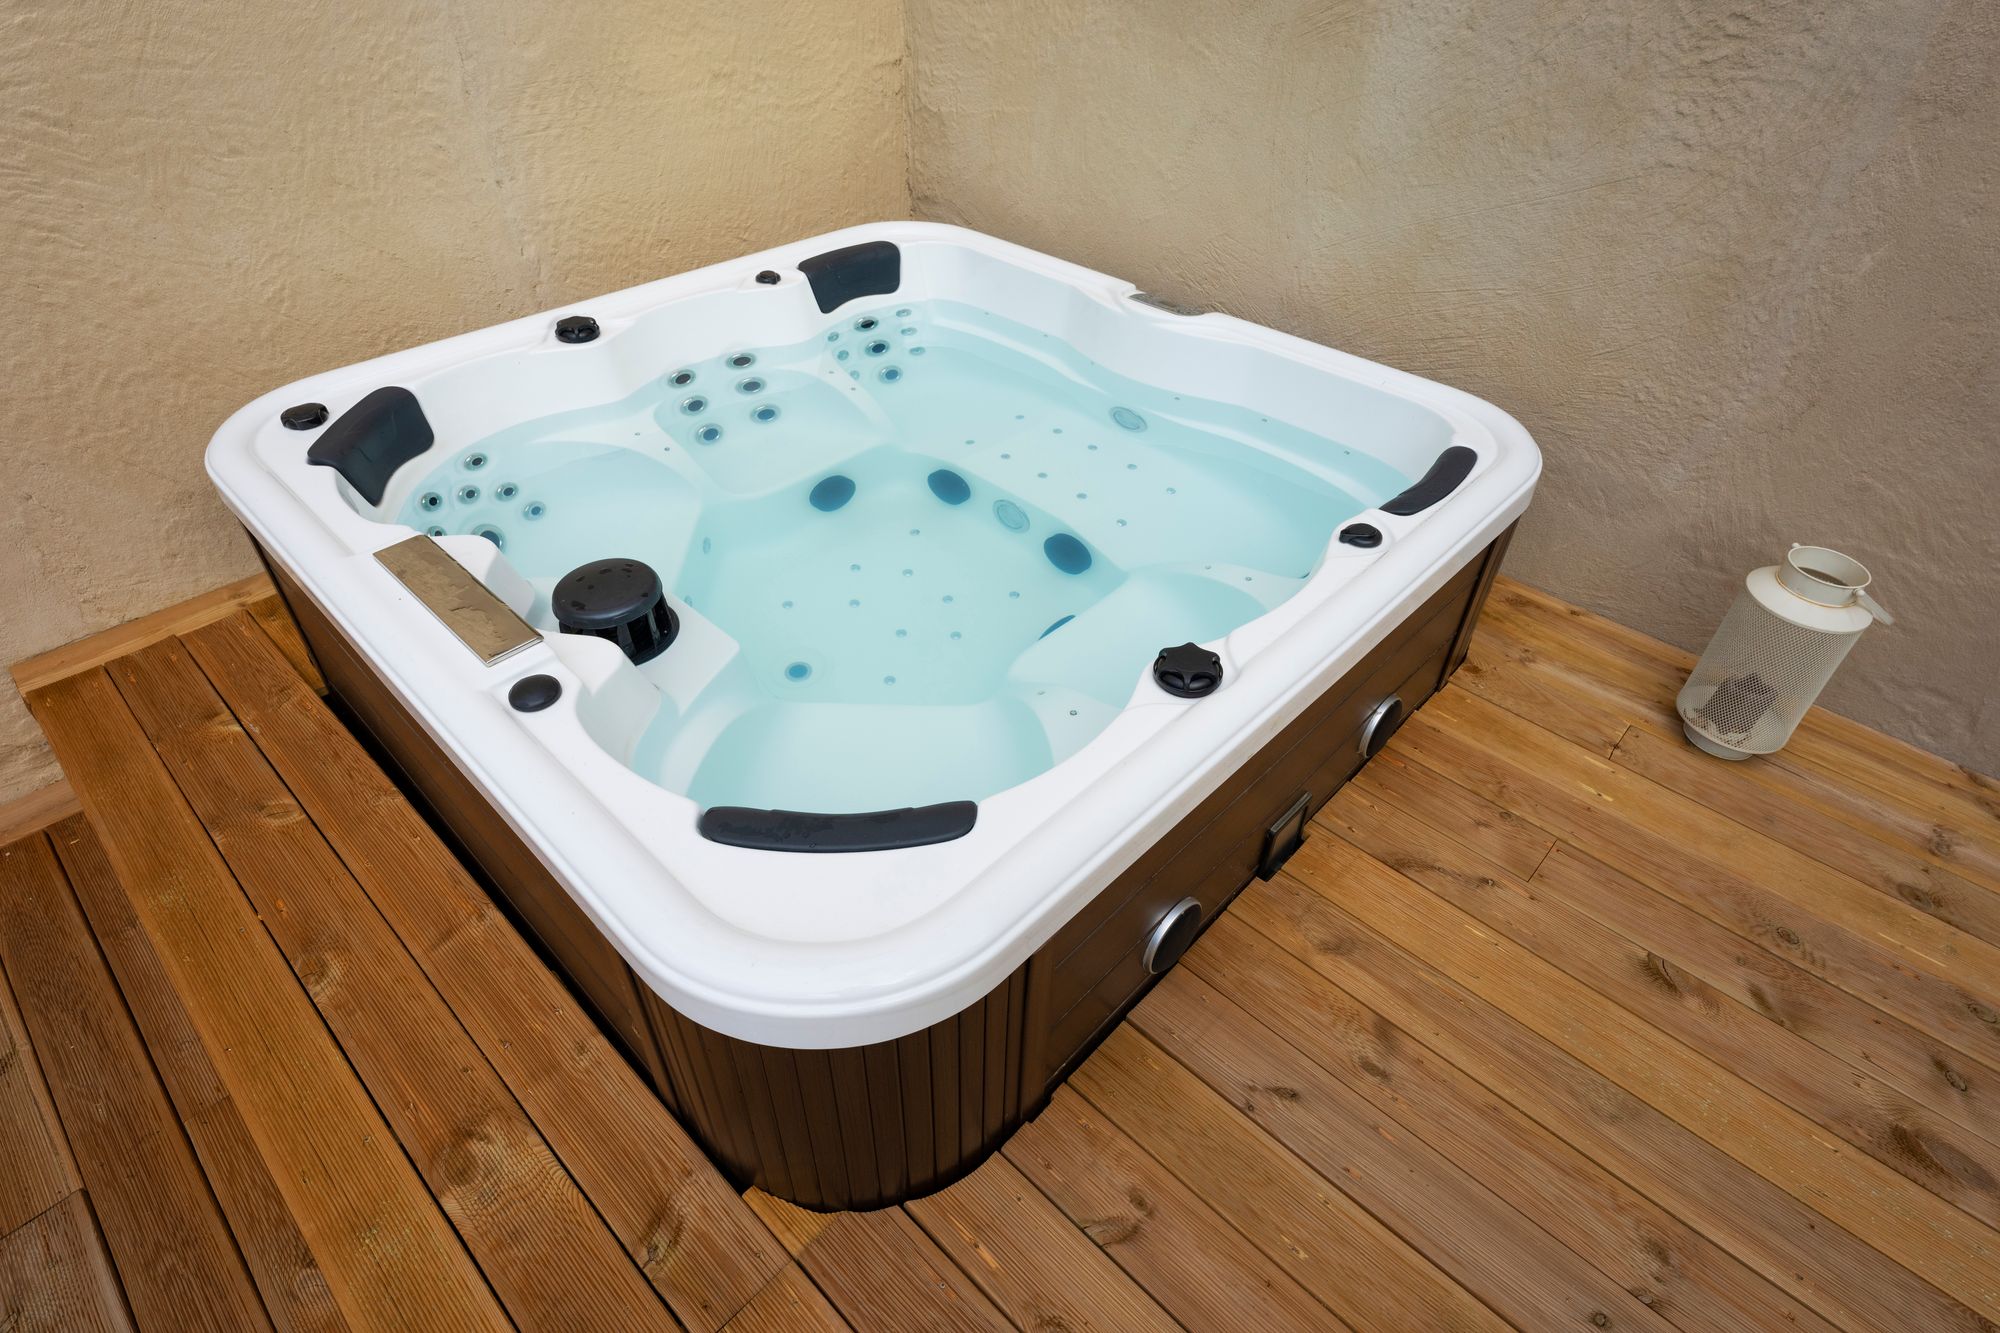 Factors to Consider in Choosing a Hot Tub